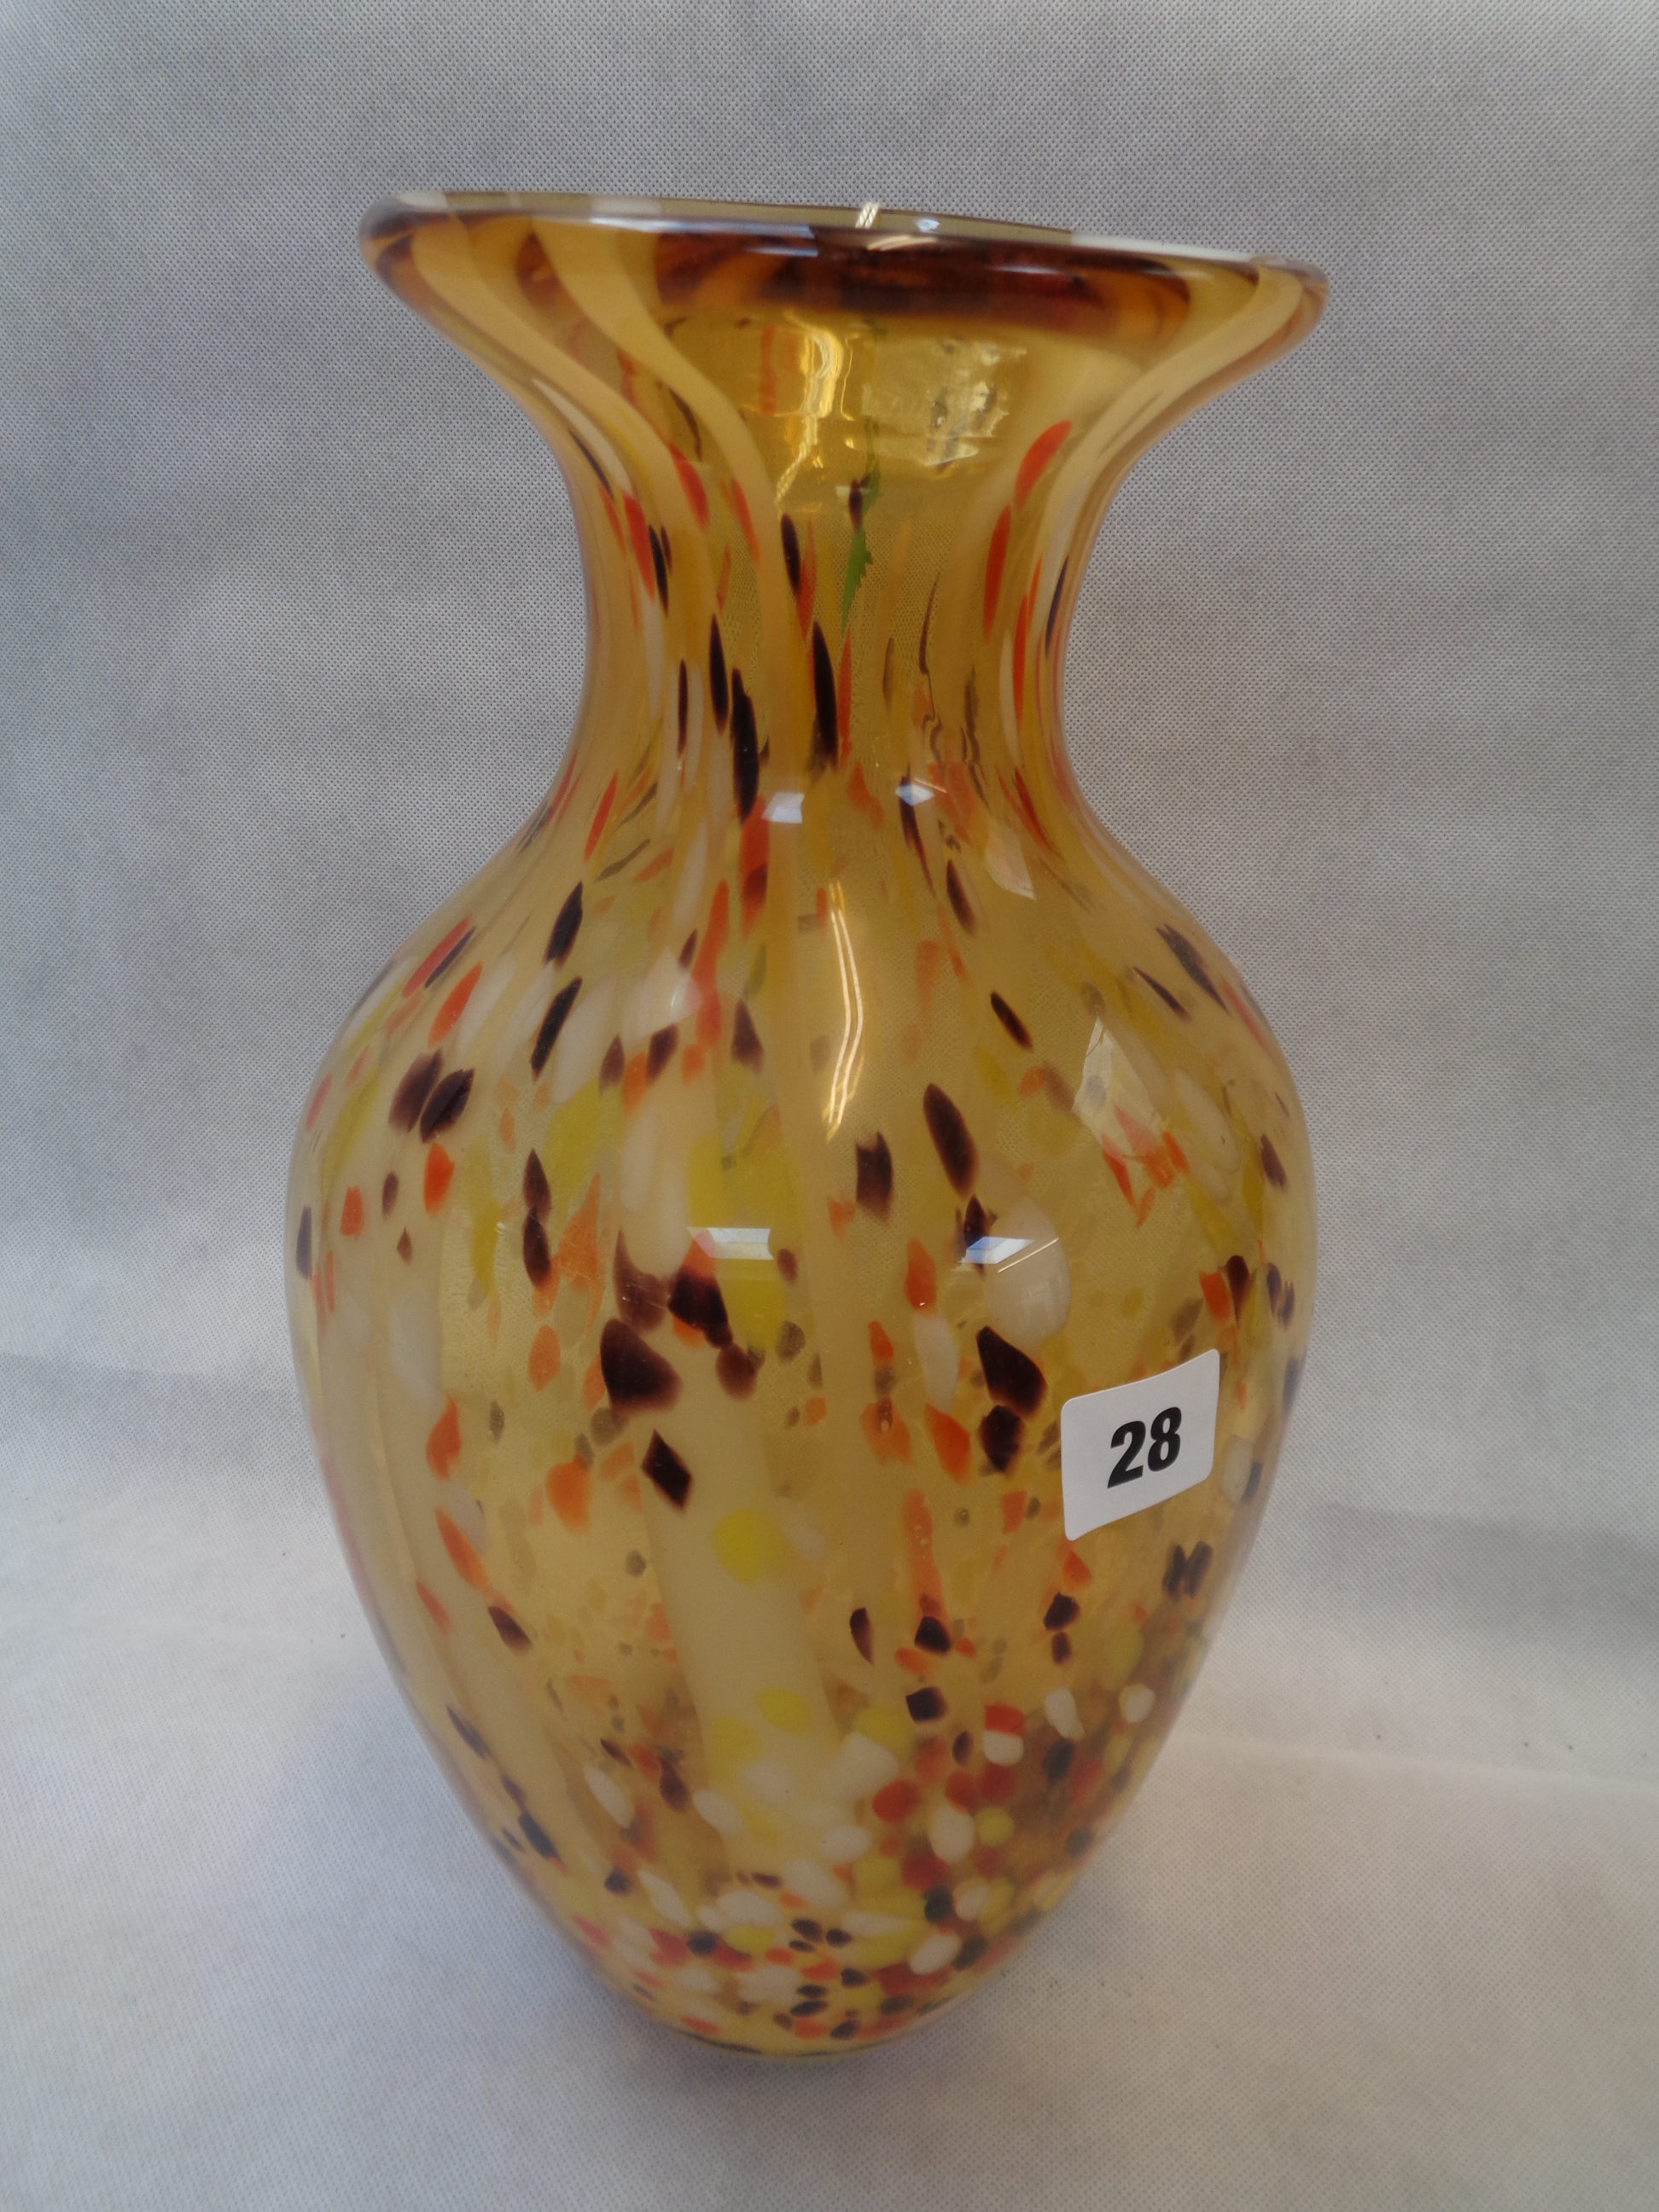 Large Amber Art Glass Vase with mottled decoration, 34cm in Height, Condition - Good Overall